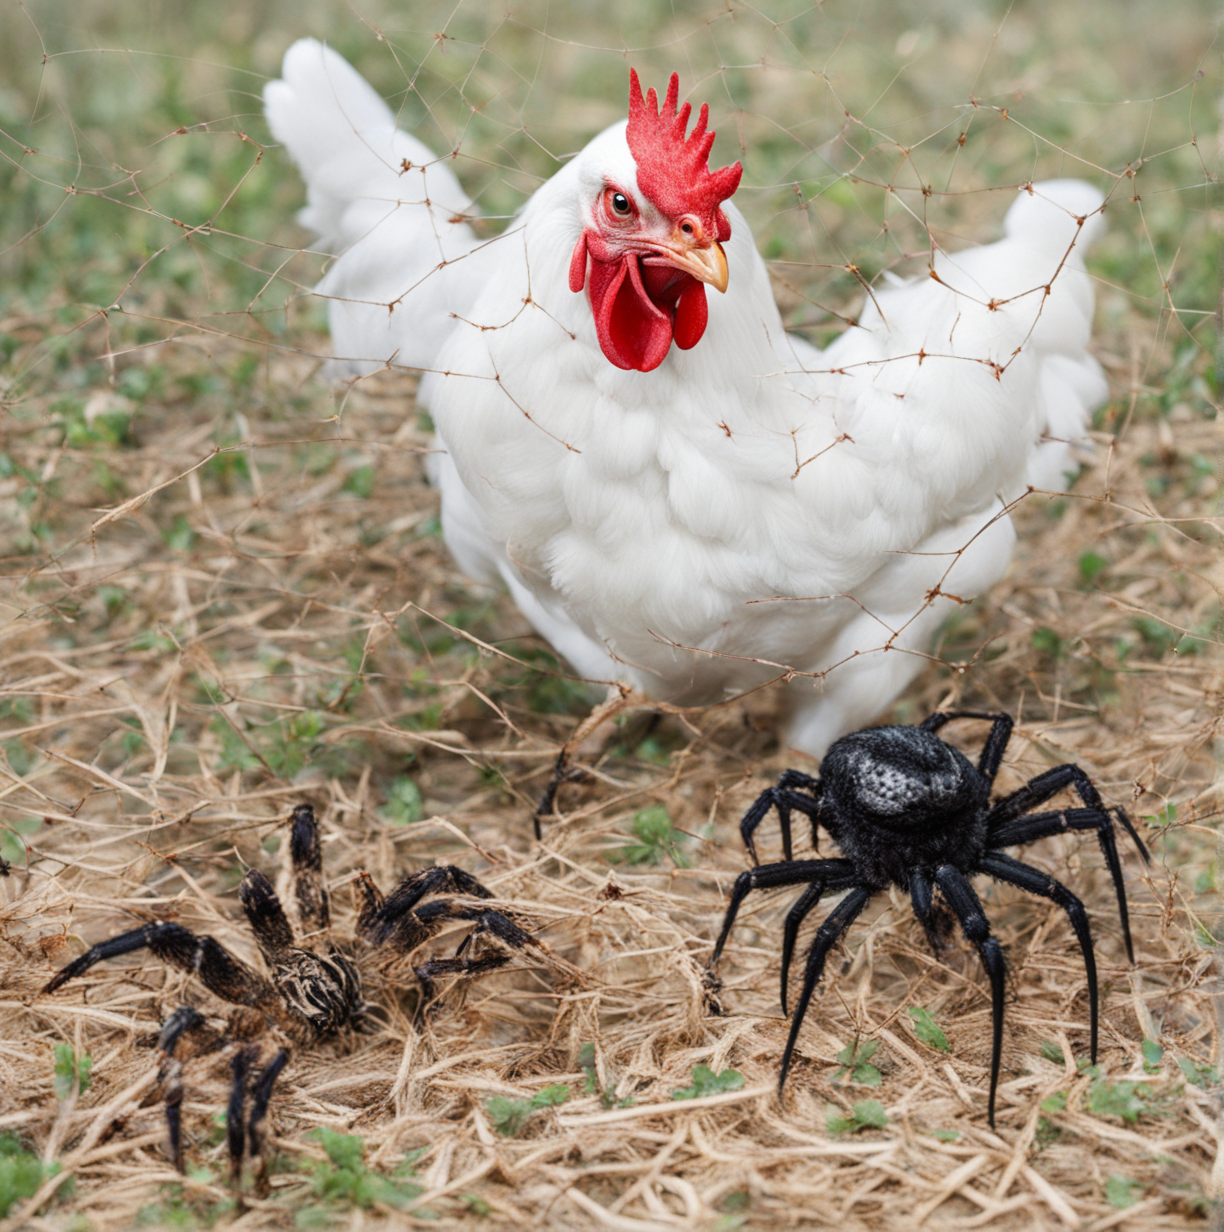 can chickens eat venomous spiders